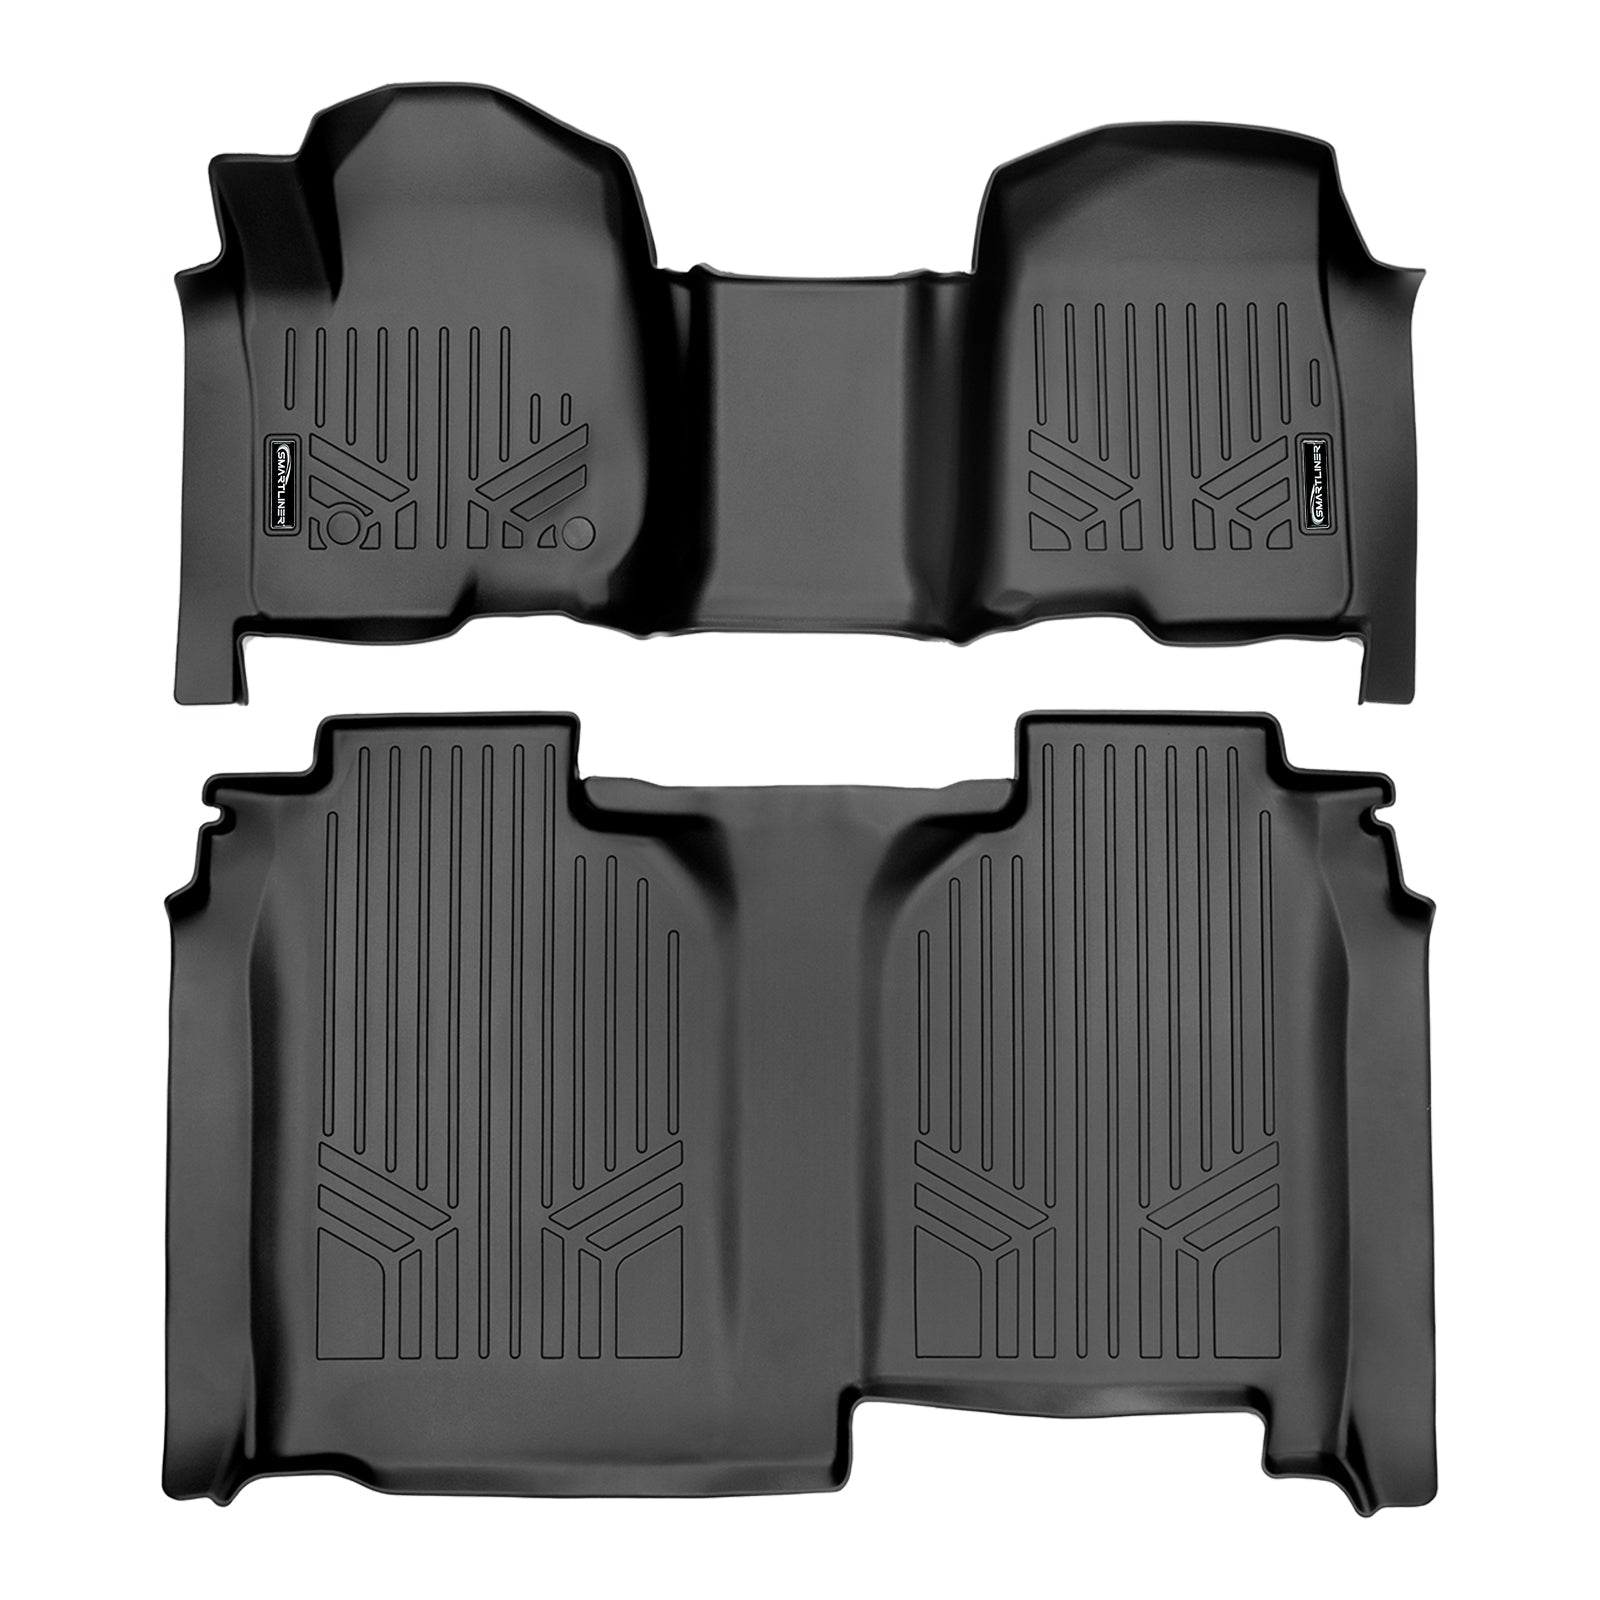 SMARTLINER Custom Fit Floor Liners Compatible With 2020-2024 Chevrolet Silverado 2500 HD | 3500 HD (Crew Cab|Carpeted Flooring|1st Row Bench Seat|With Over the Hump Coverage|without 2nd Row Underseat Storage)